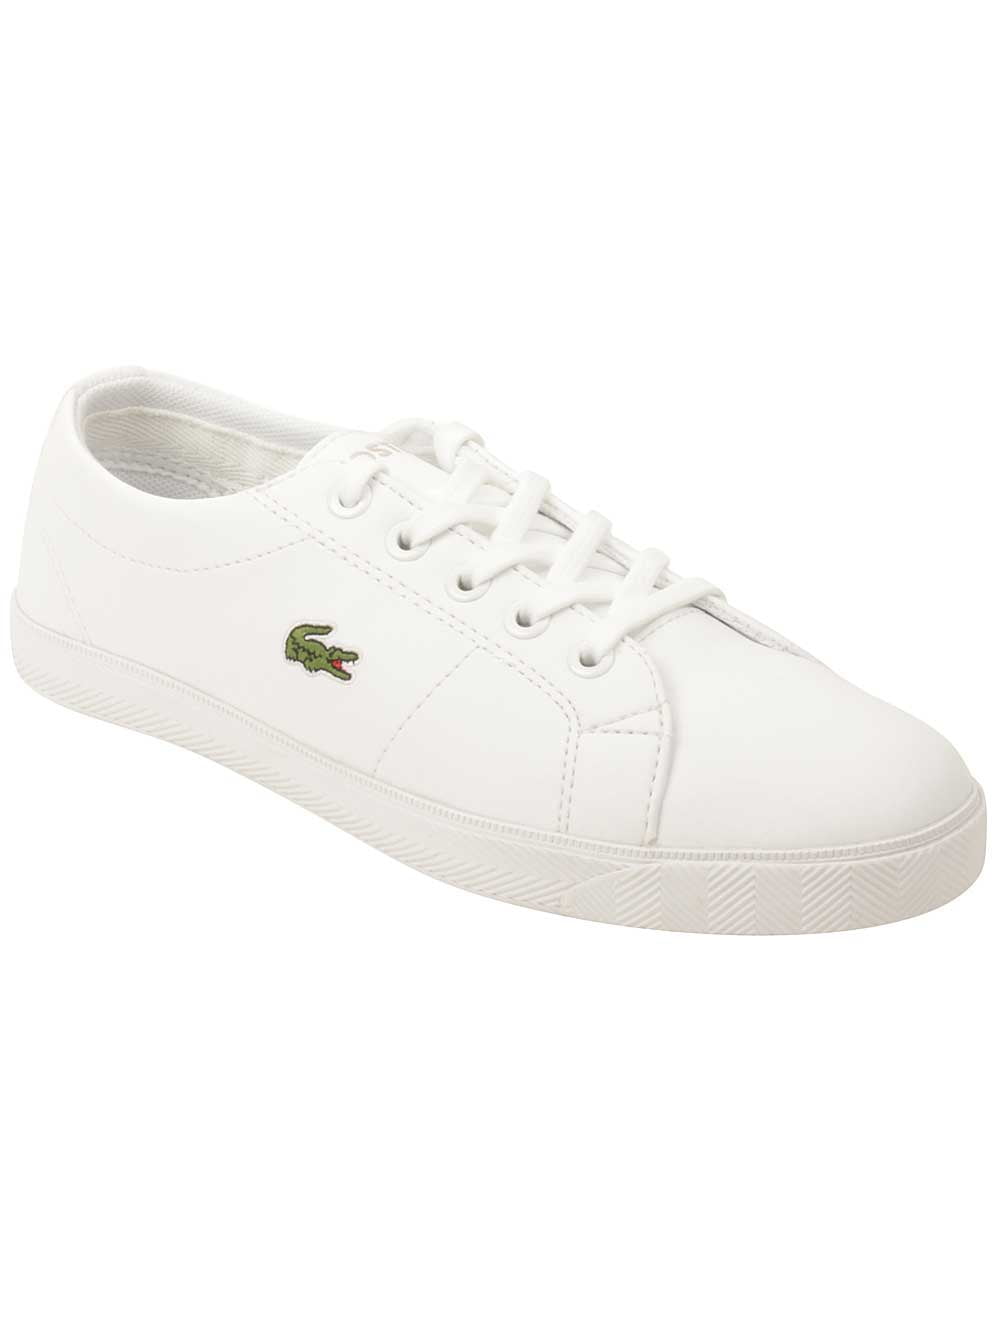 Toddler Marcel LCR Sneakers in White Walmart.com